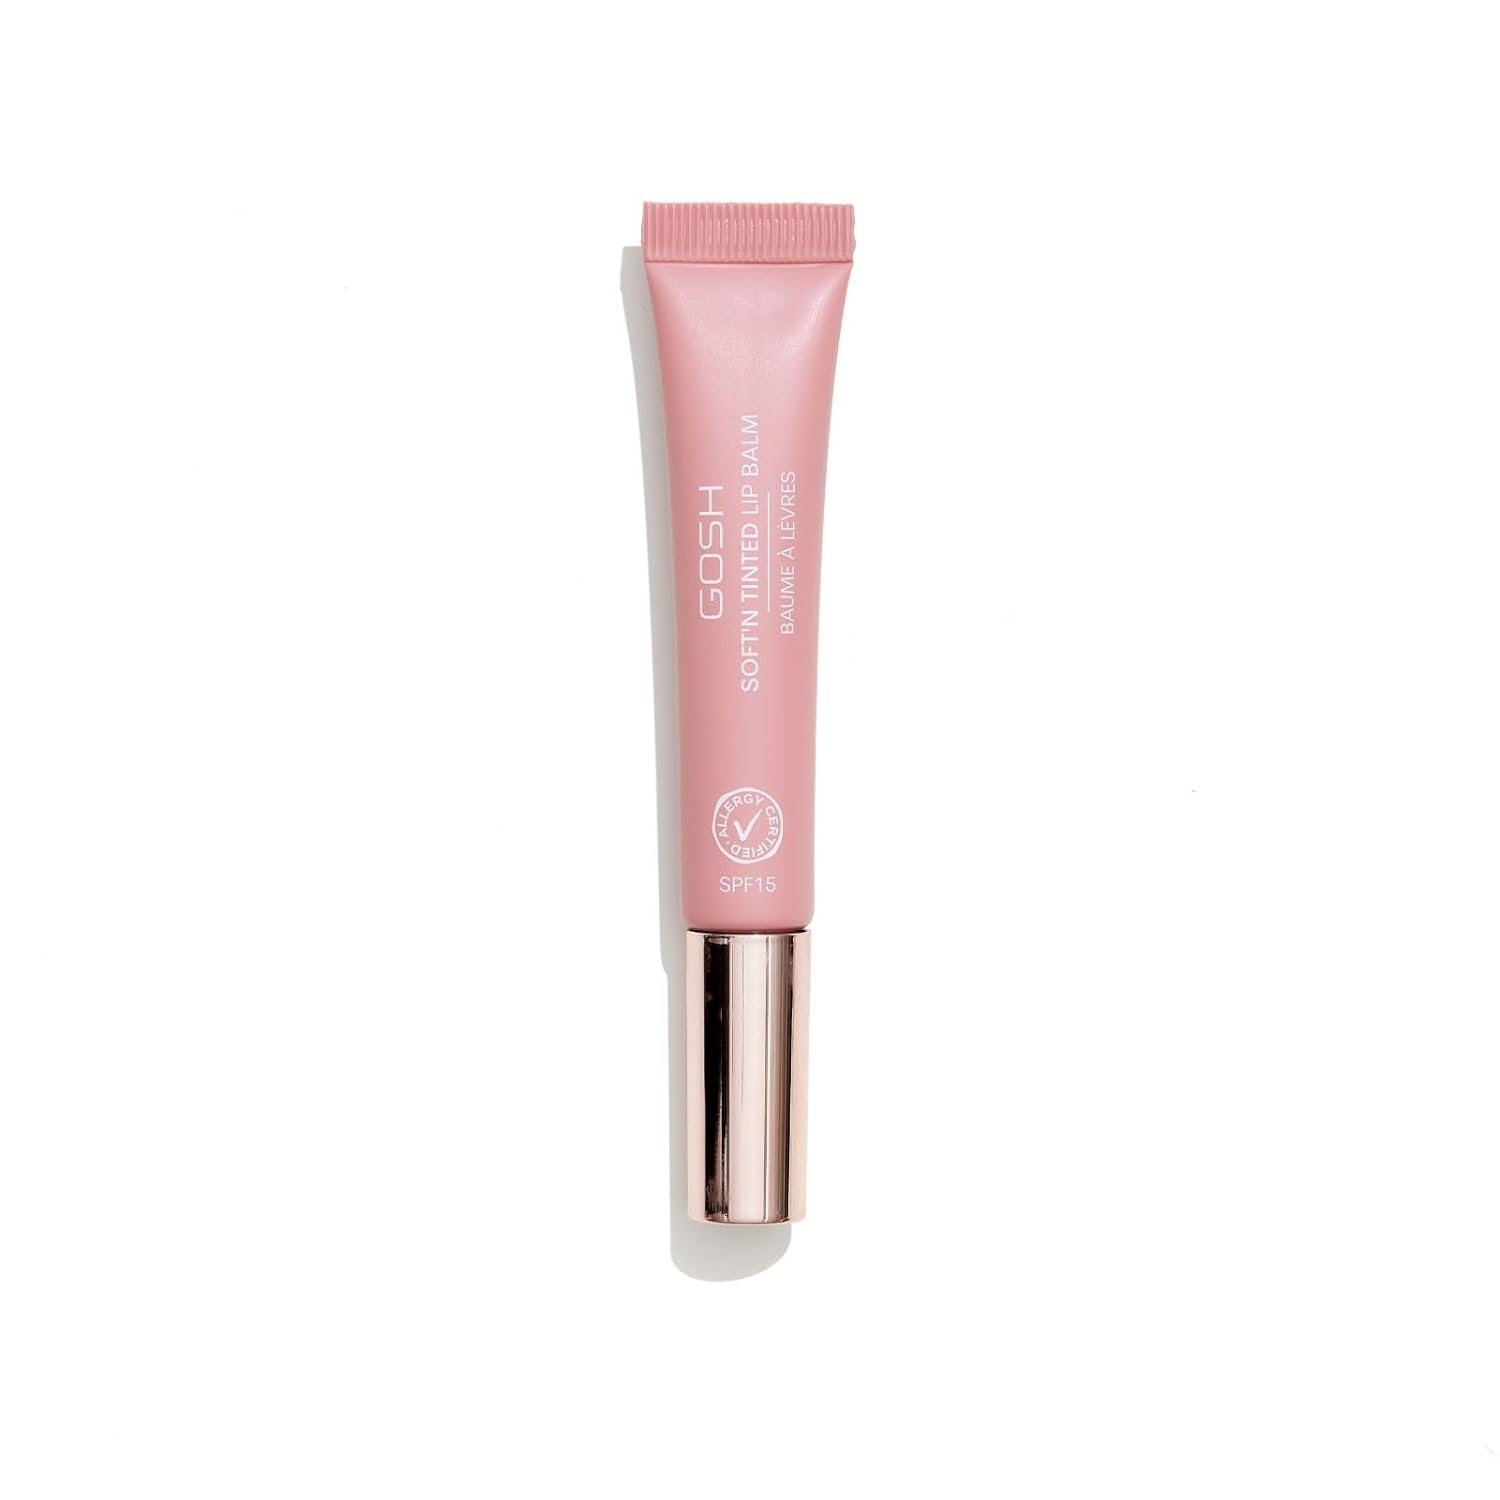 GOSH Tinted Lip Balm with SPF 15 I Vegan Lip Care Pen with Colour in Vintage Rose 04 I Smooth Soft Lips without Gluing I Fragrance-Free Glossy Booster I Moisturising Lip Balm